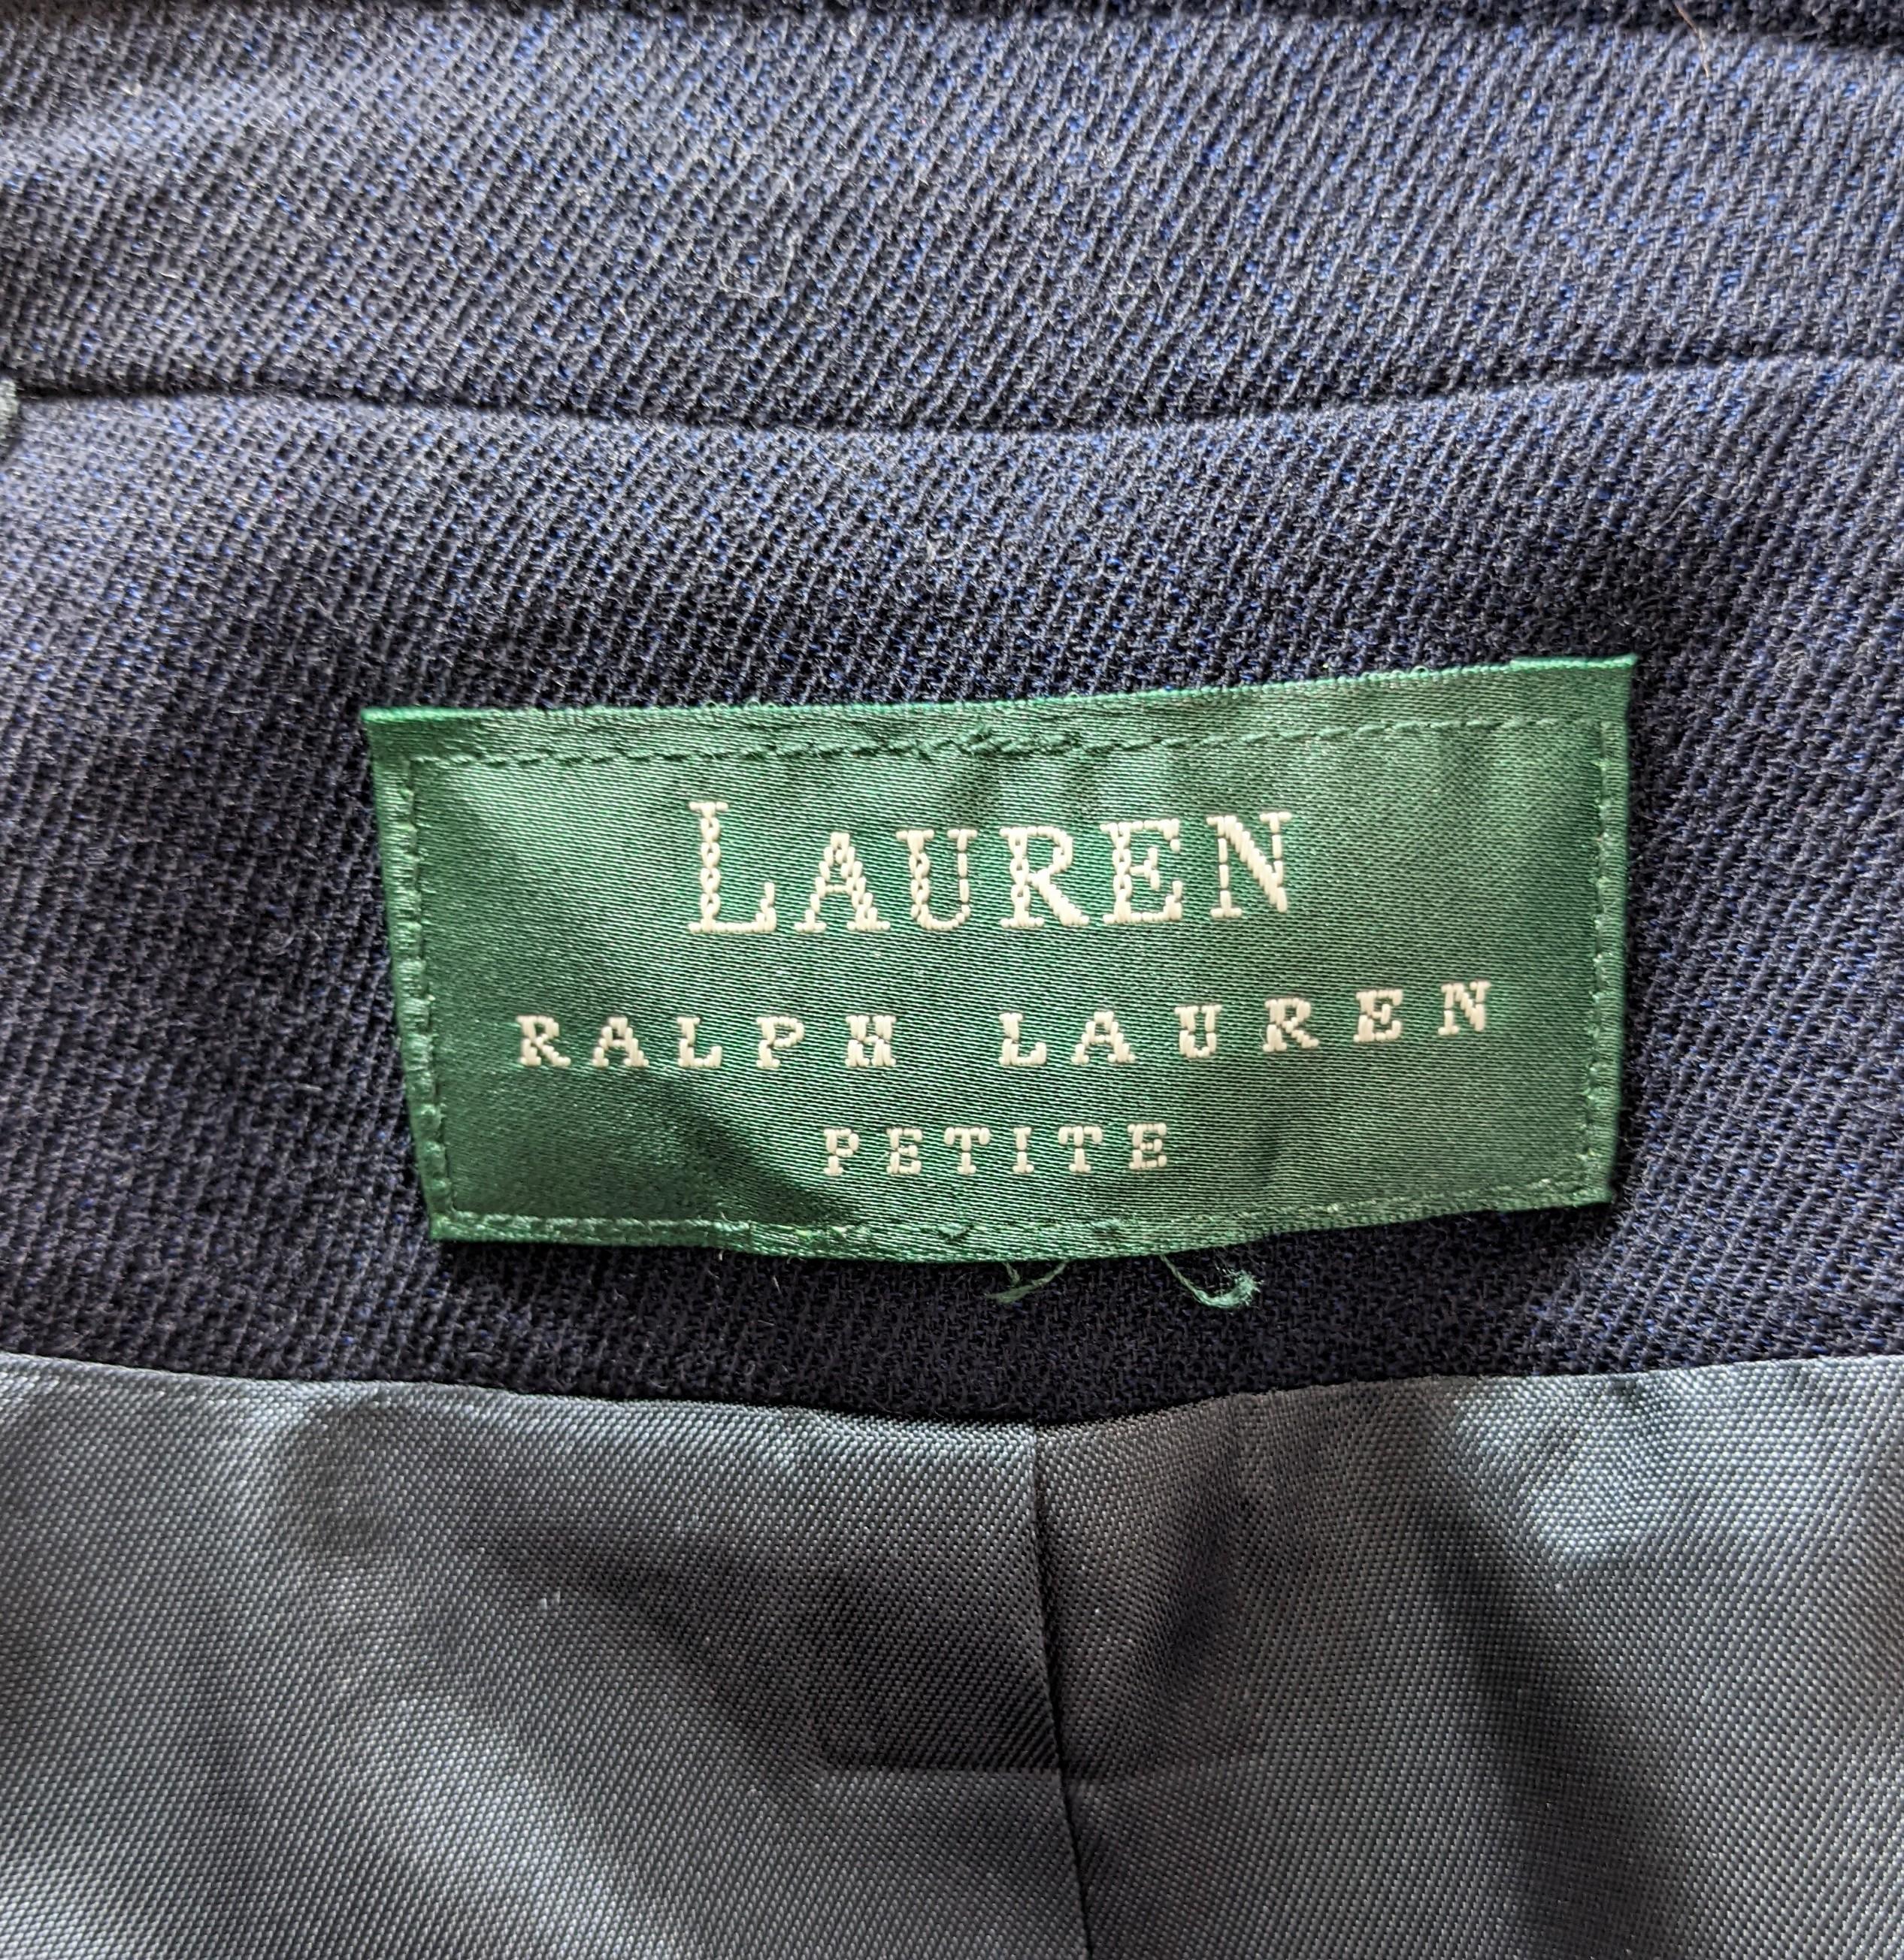 Ralph Lauren Military Style Jacket For Sale 2